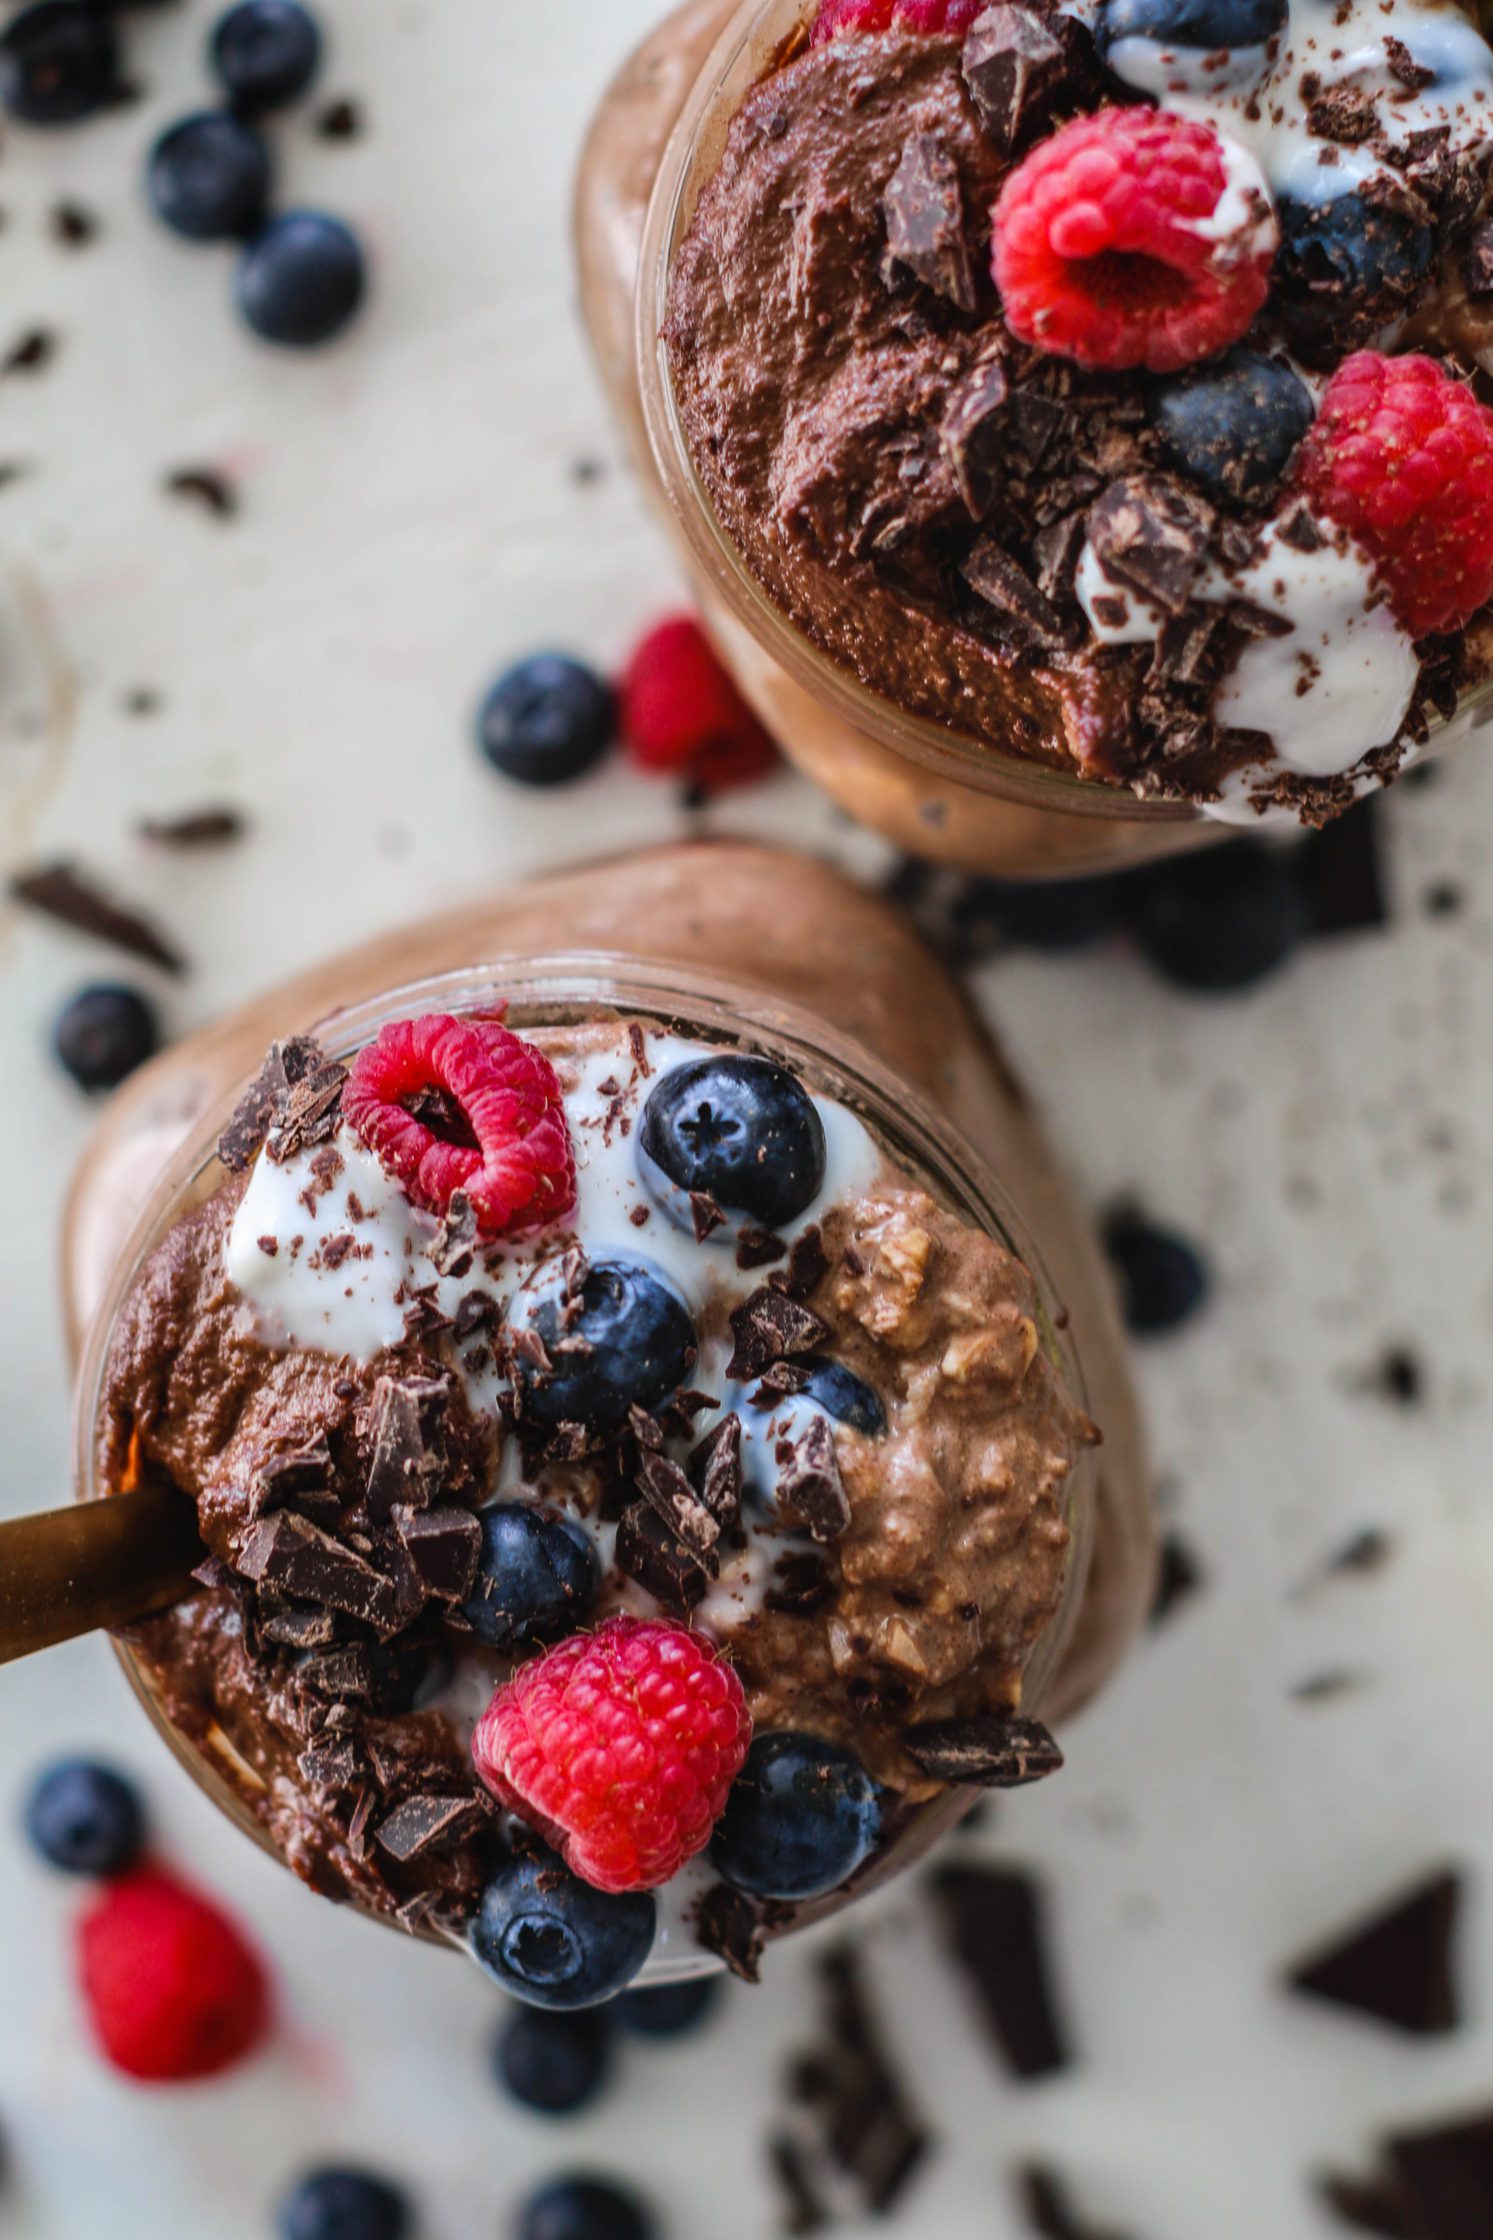 Hot Chocolate Overnight Oats topped with Chocolate Cashew Cream by Flora & Vino